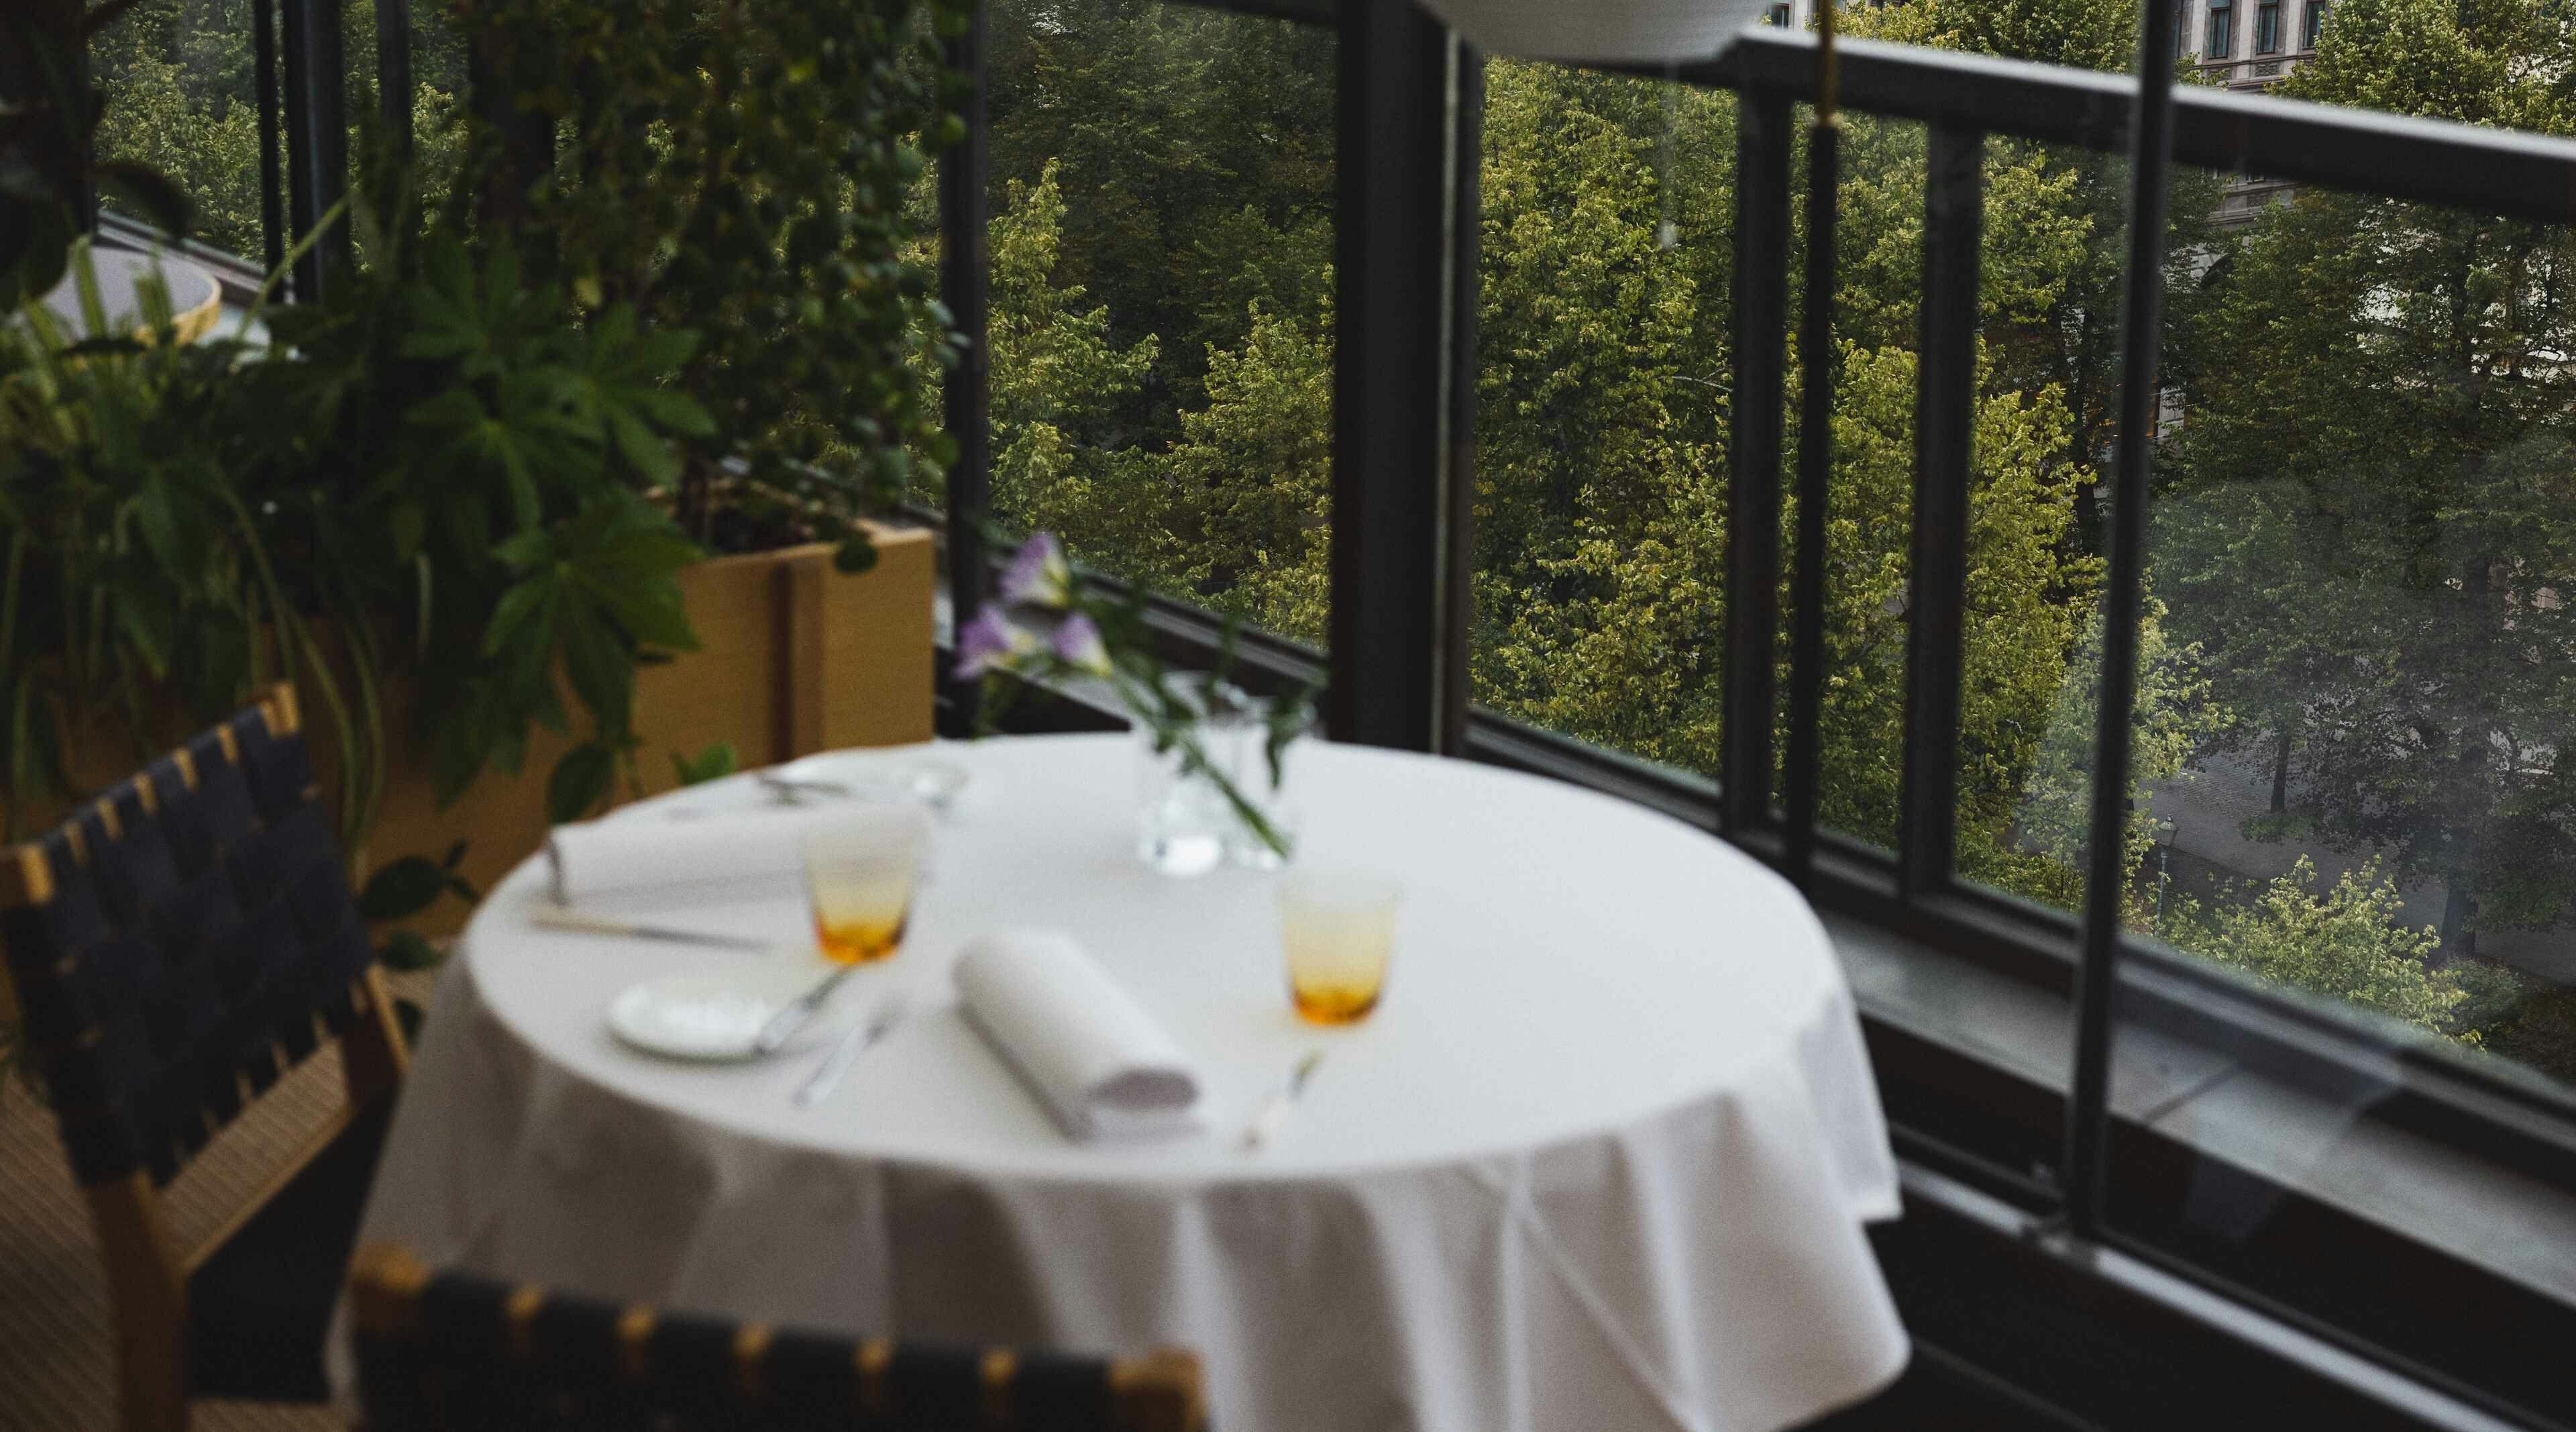 With views over Helsinki and across the Esplanade park, our indoor terrace is open year round.